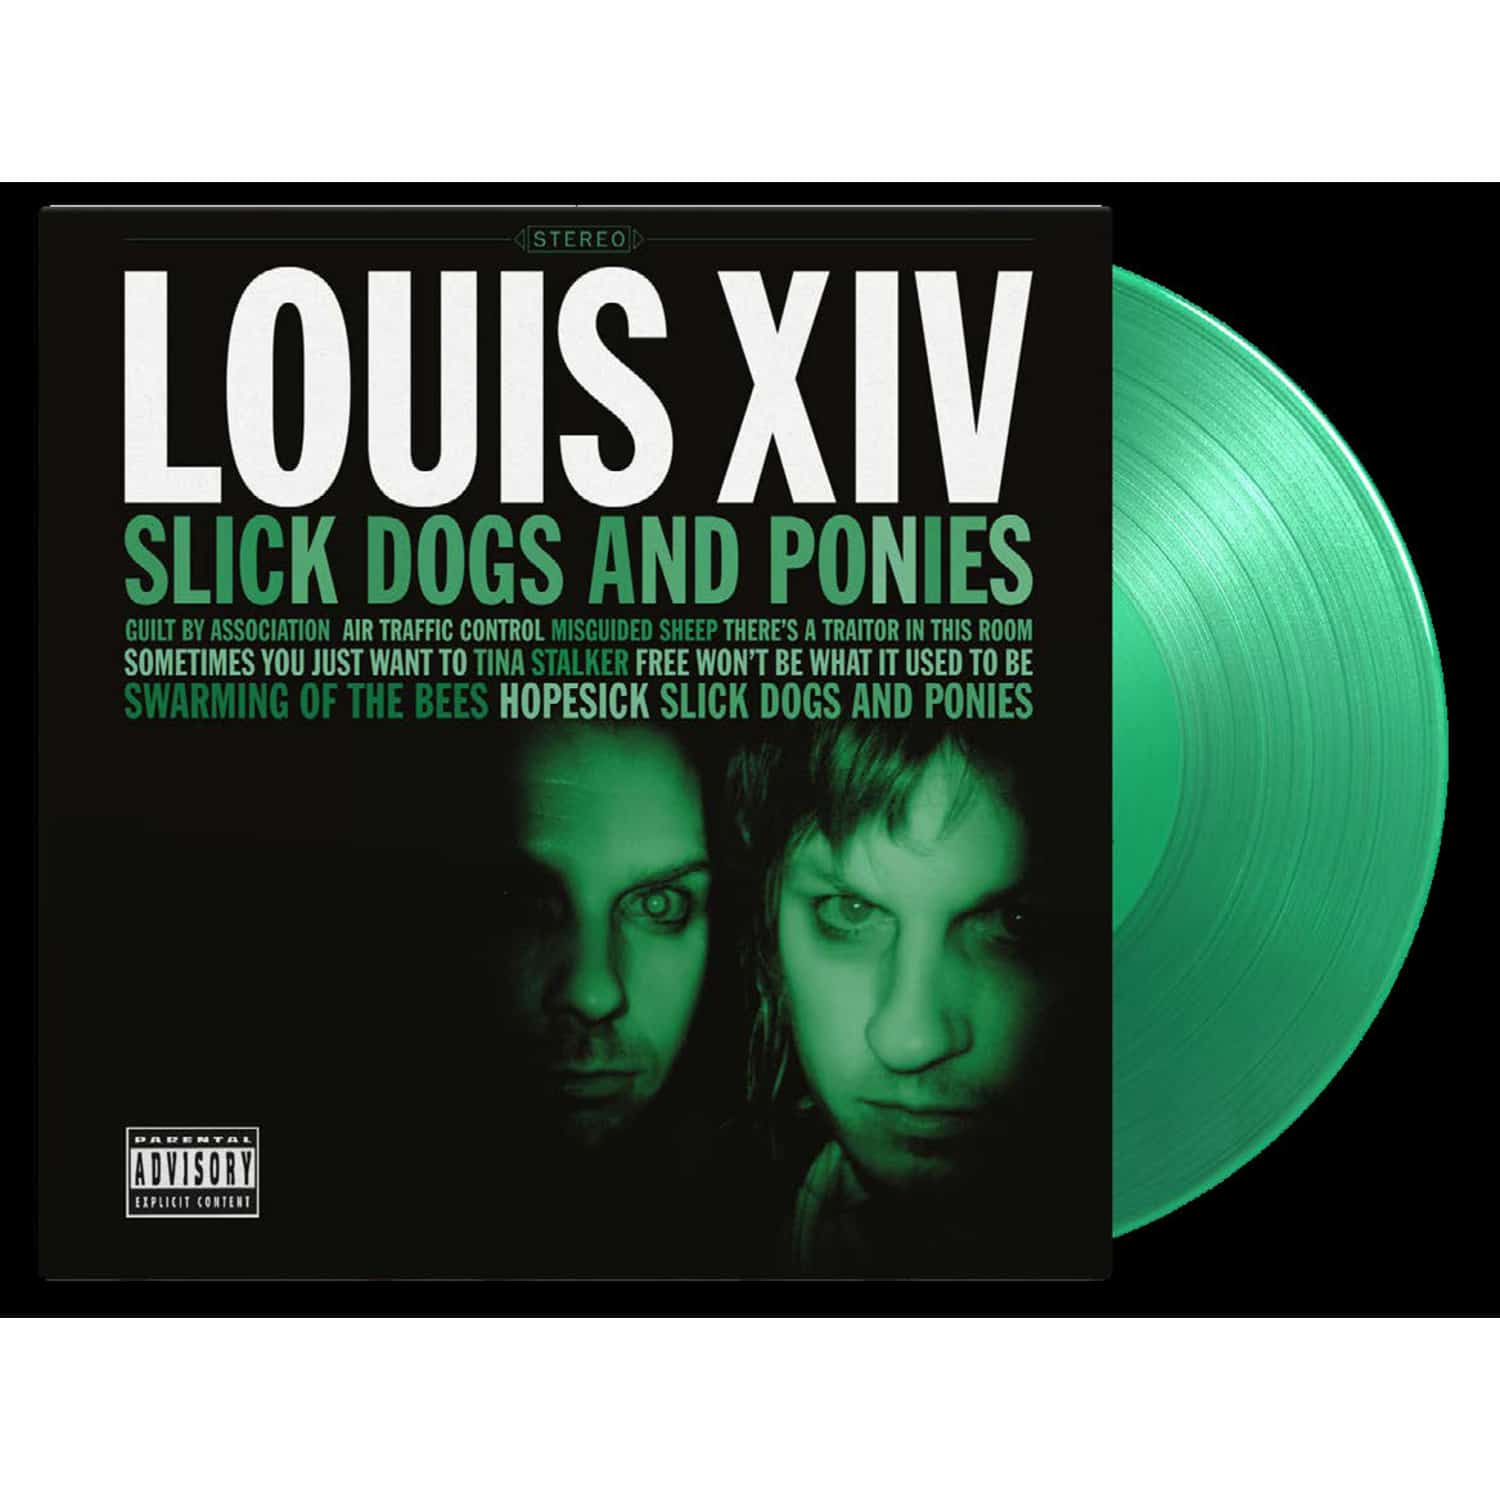 Louis XIV - SLICK DOGS AND PONIES 